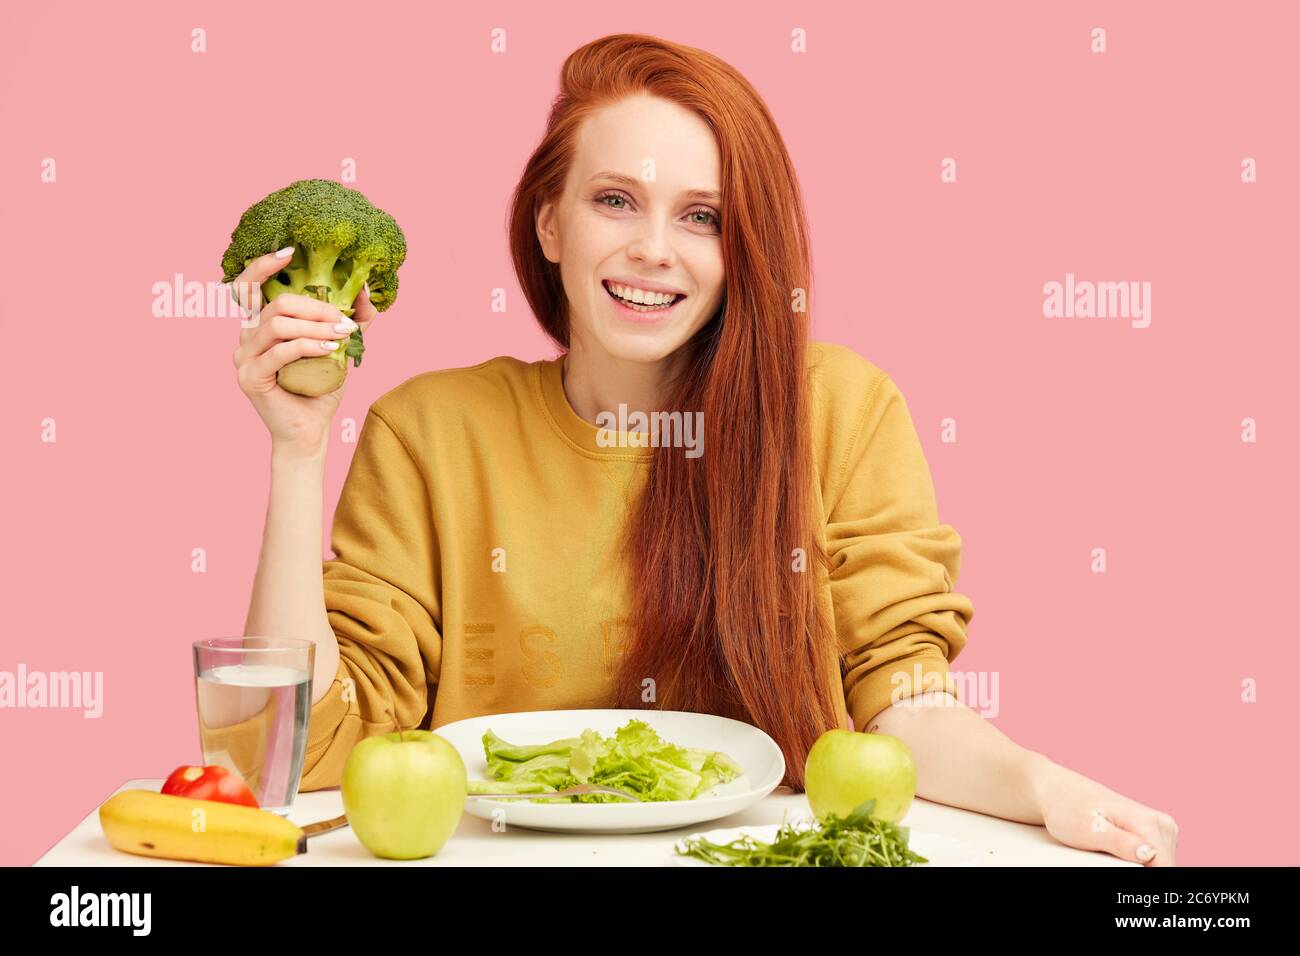 young pleasantly-looking vegg woman eating with eagerness and appetite raw green broccoli , smiling happy at camera over studio isolated pink backgrou Stock Photo